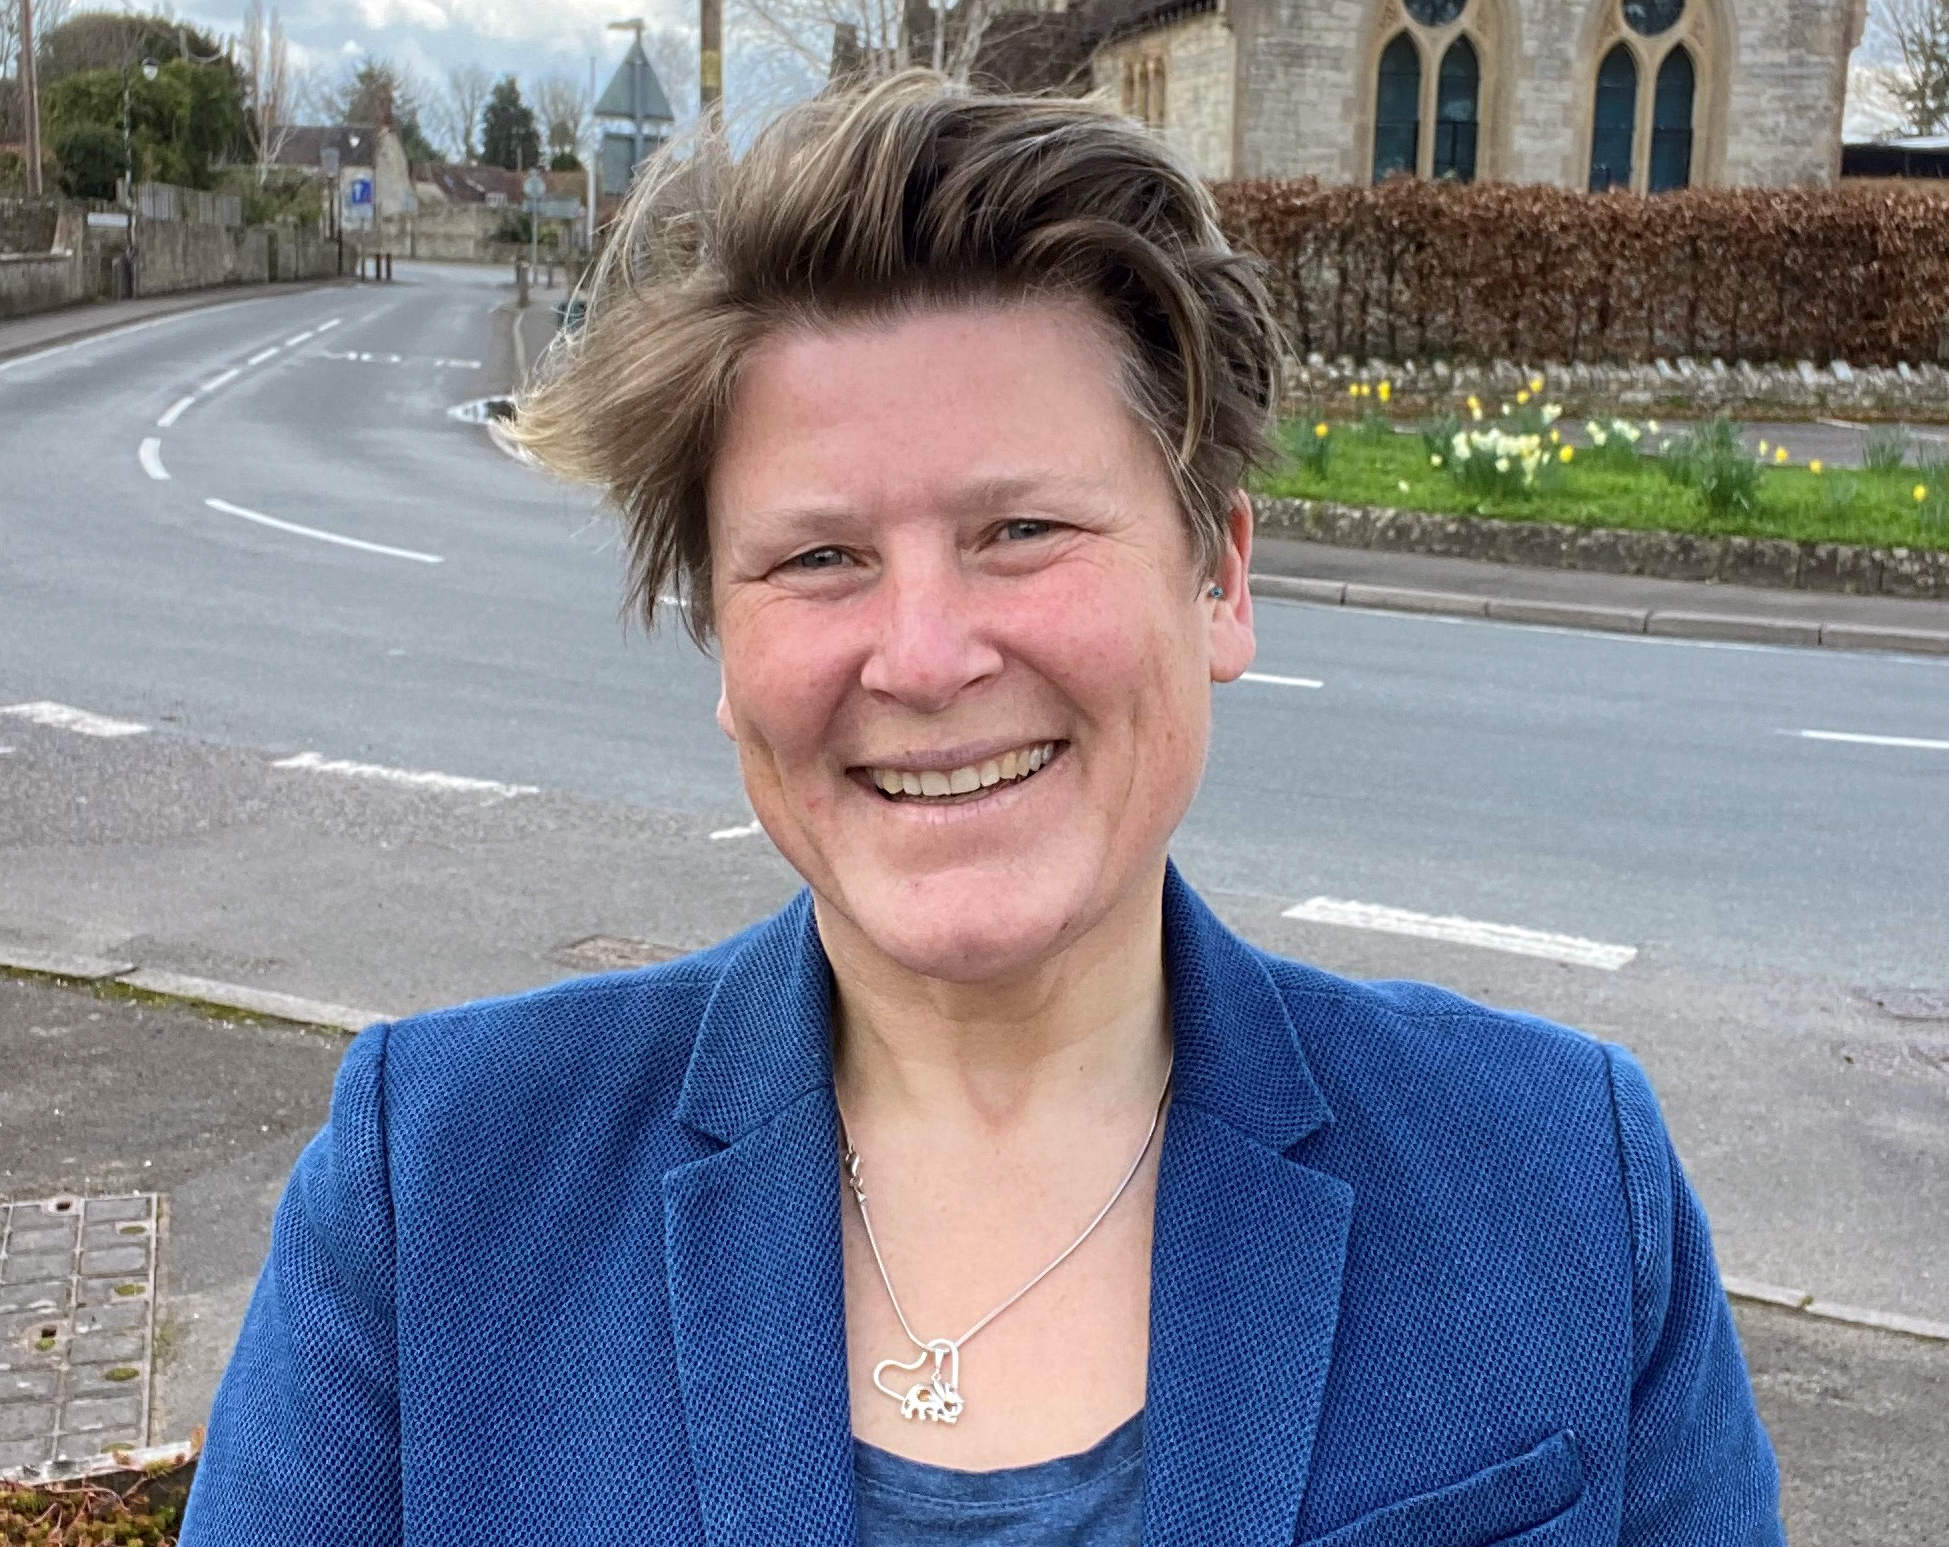 Sarah Dyke is the new MP for Somerton & Frome